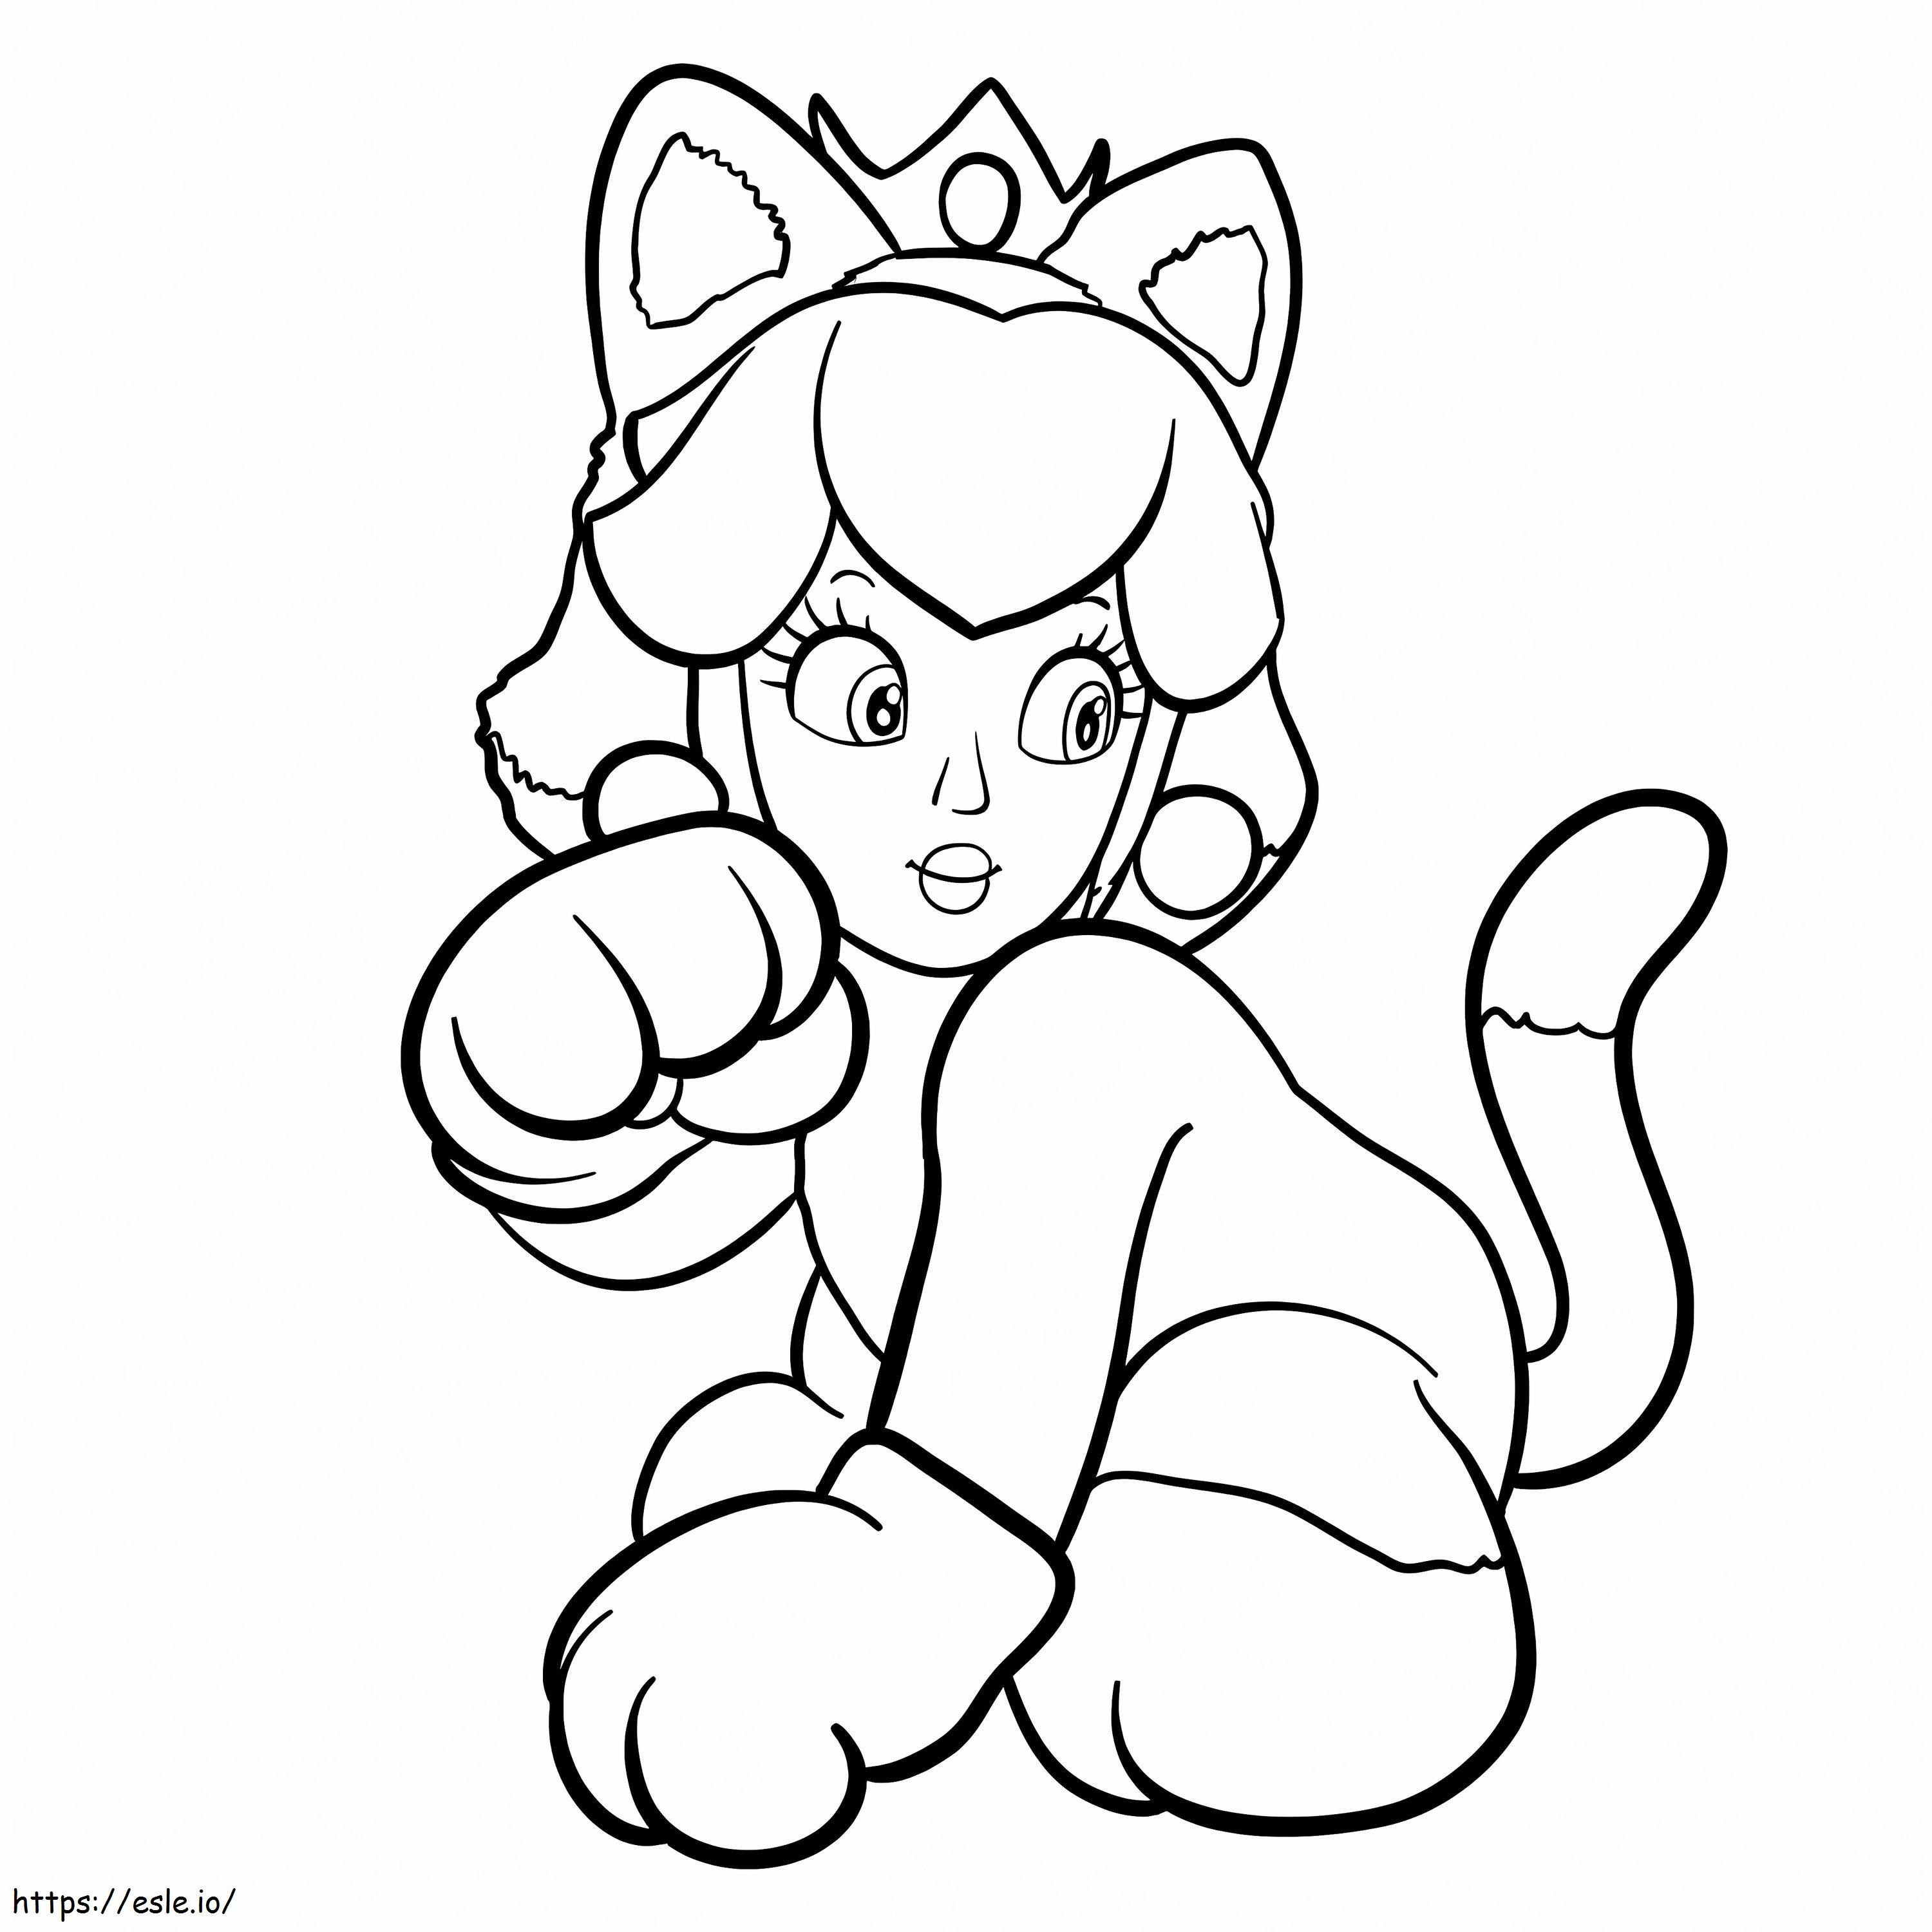 Princess Peach In A Cat Suit coloring page